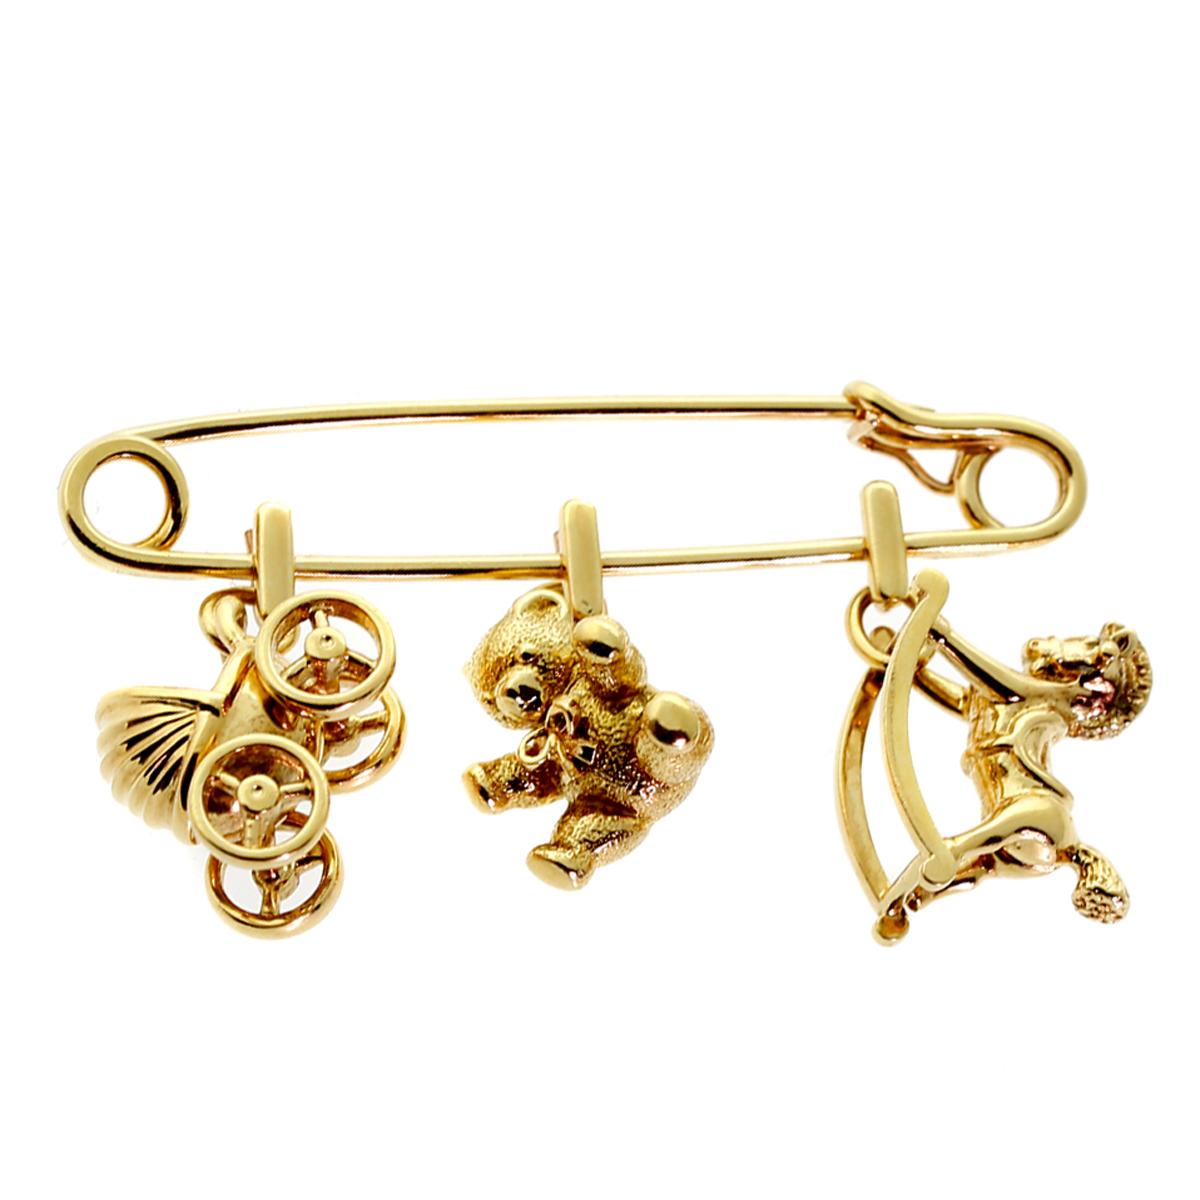 safety pin brooch with charms